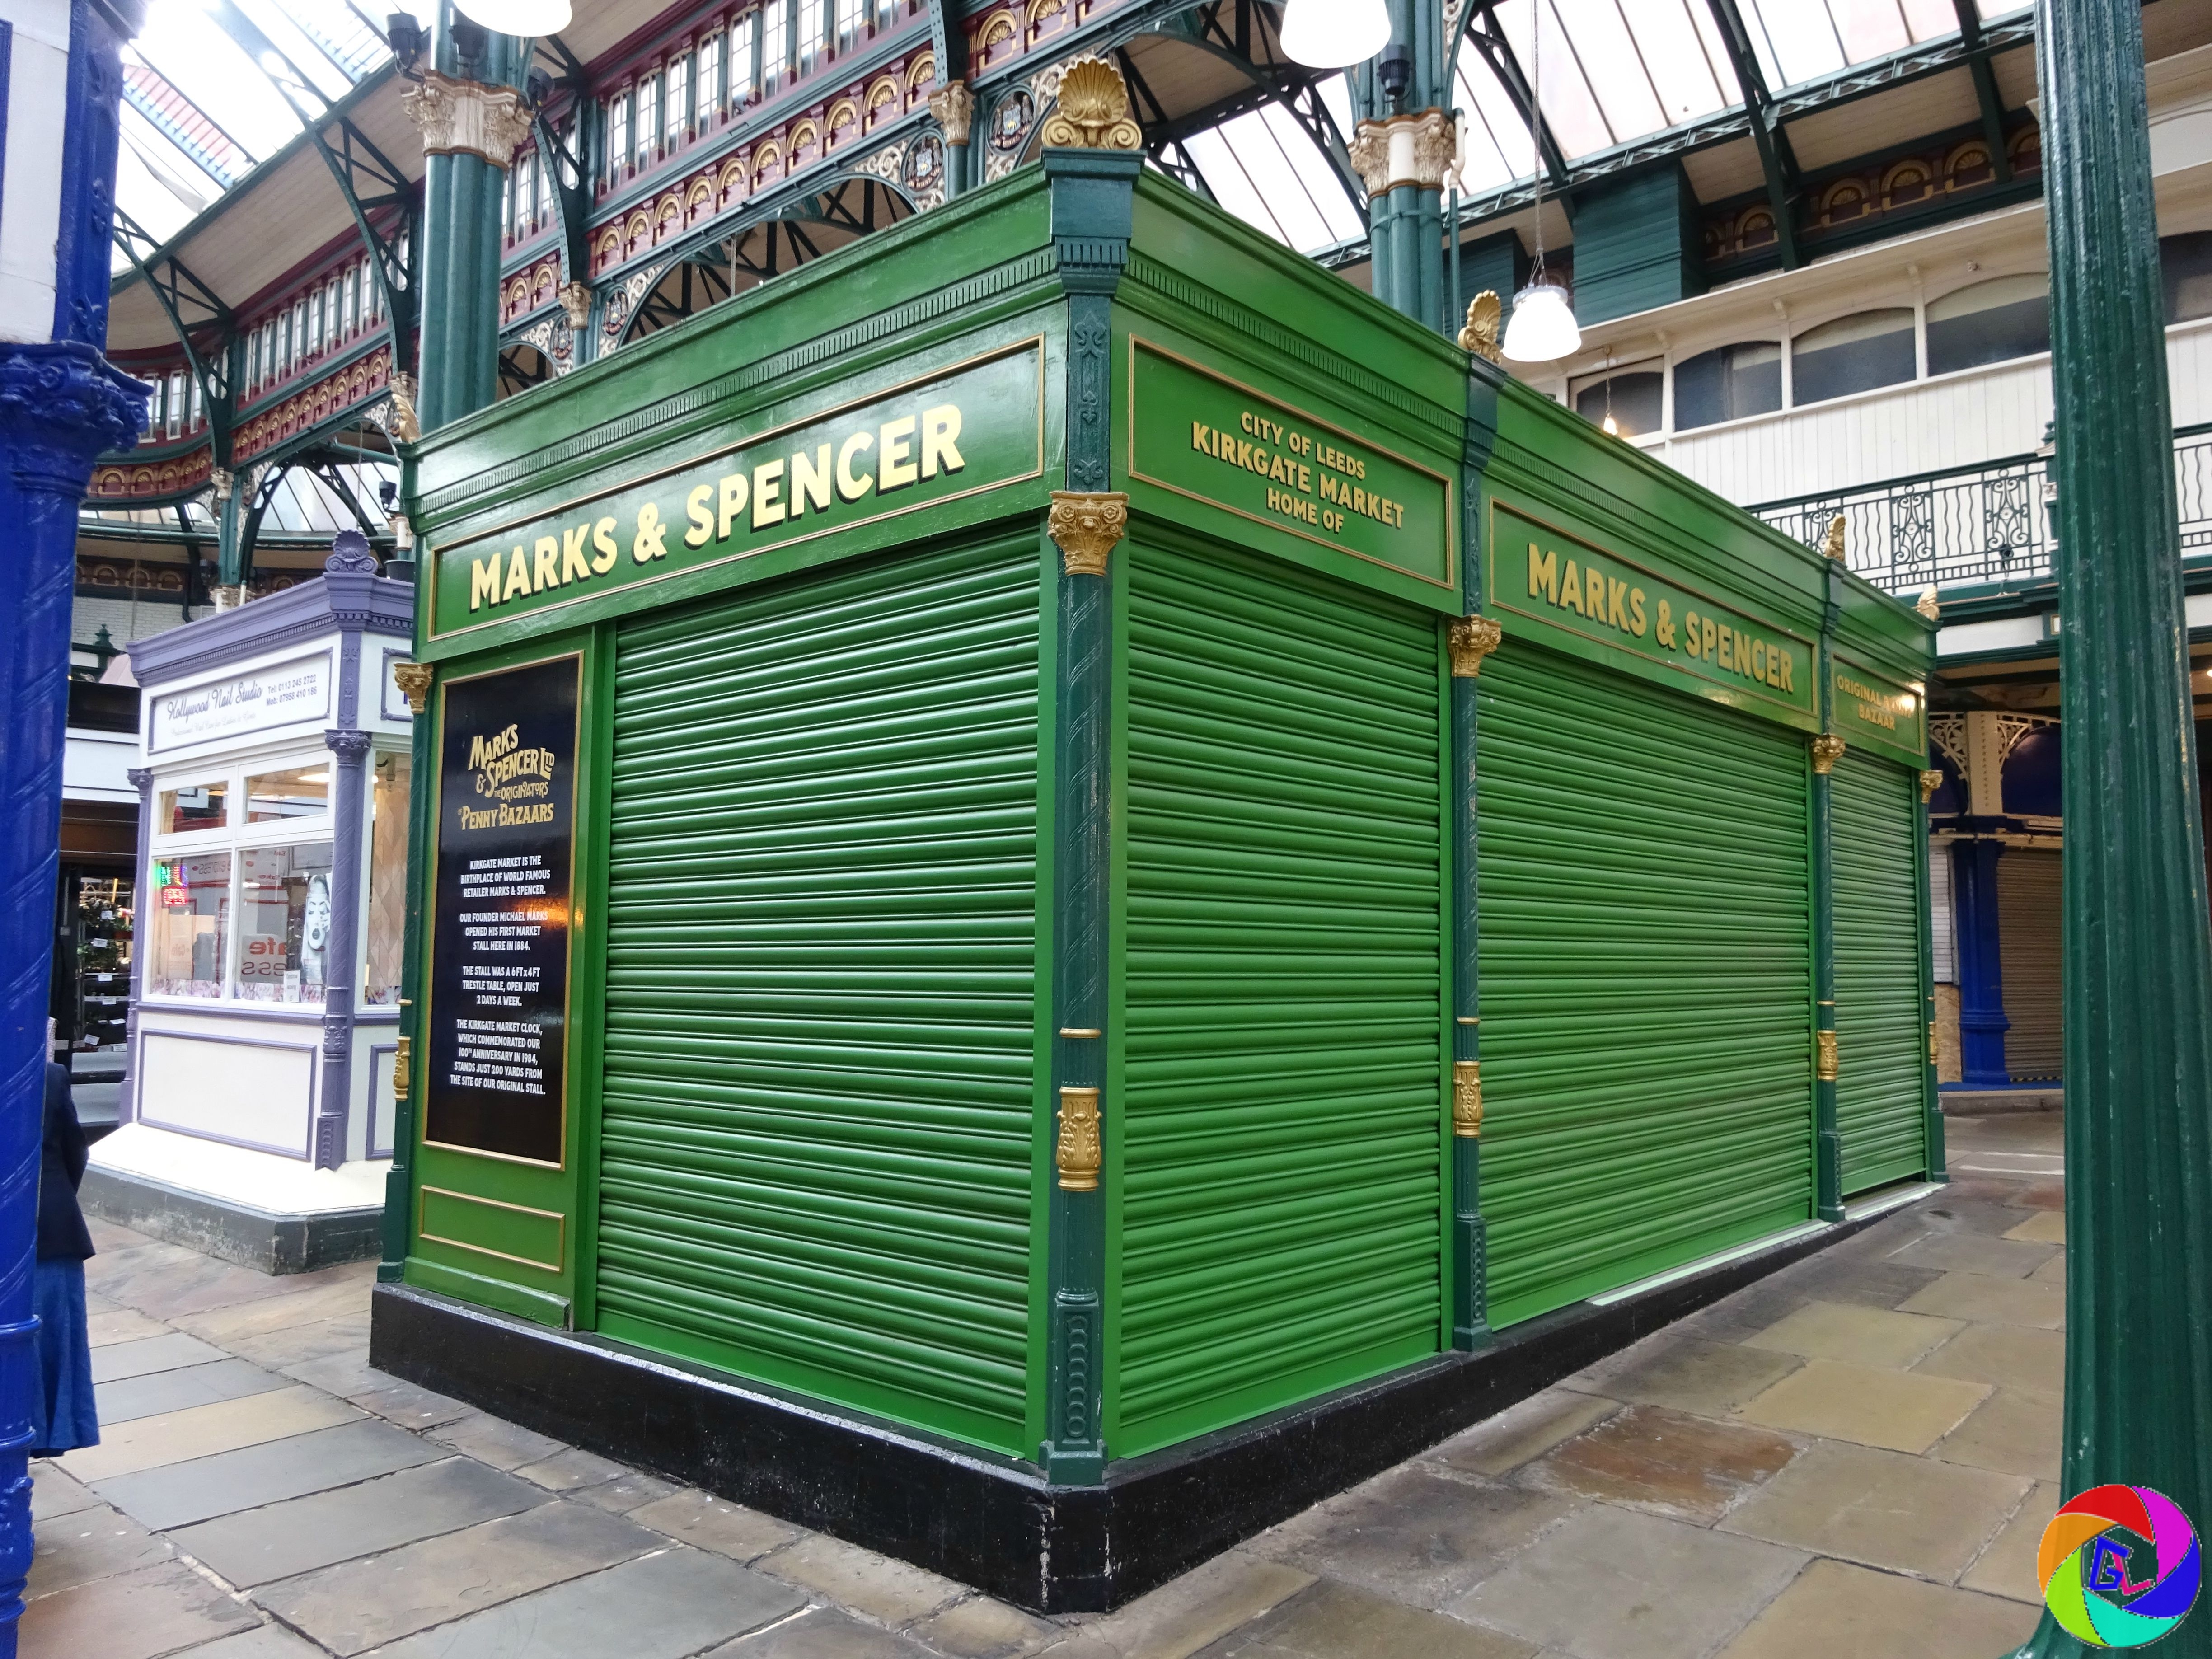 Reproduction of the original M&S stall.